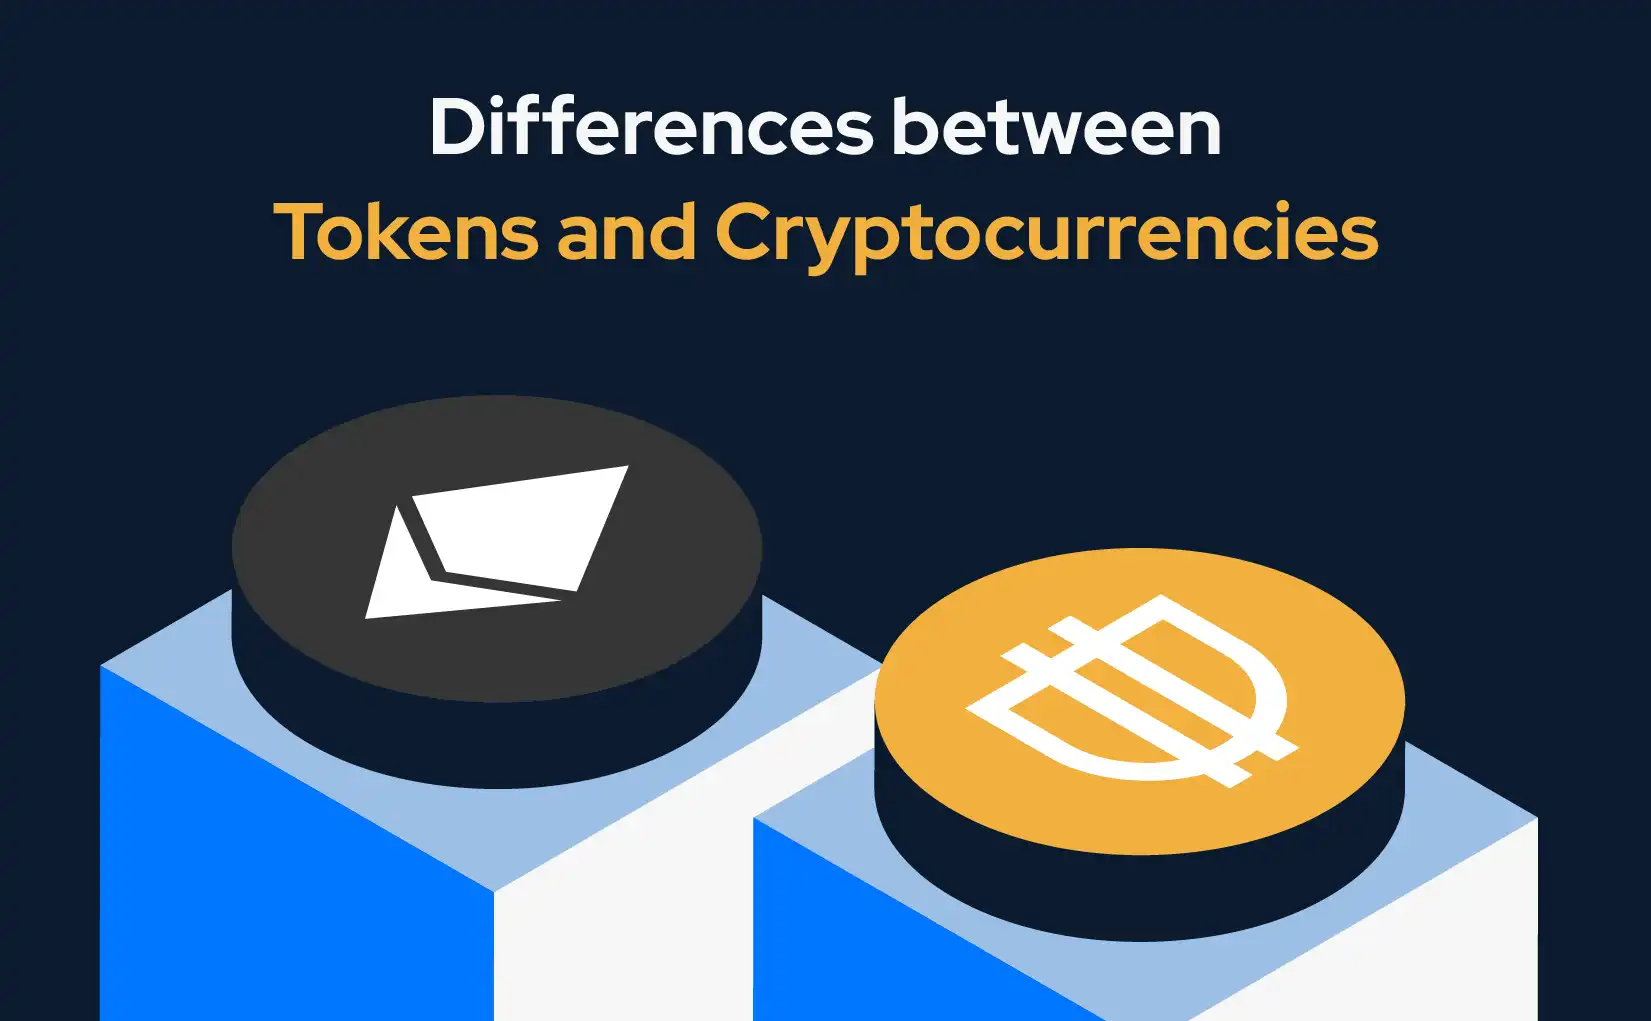 Differences between Tokens and Cryptocurrencies